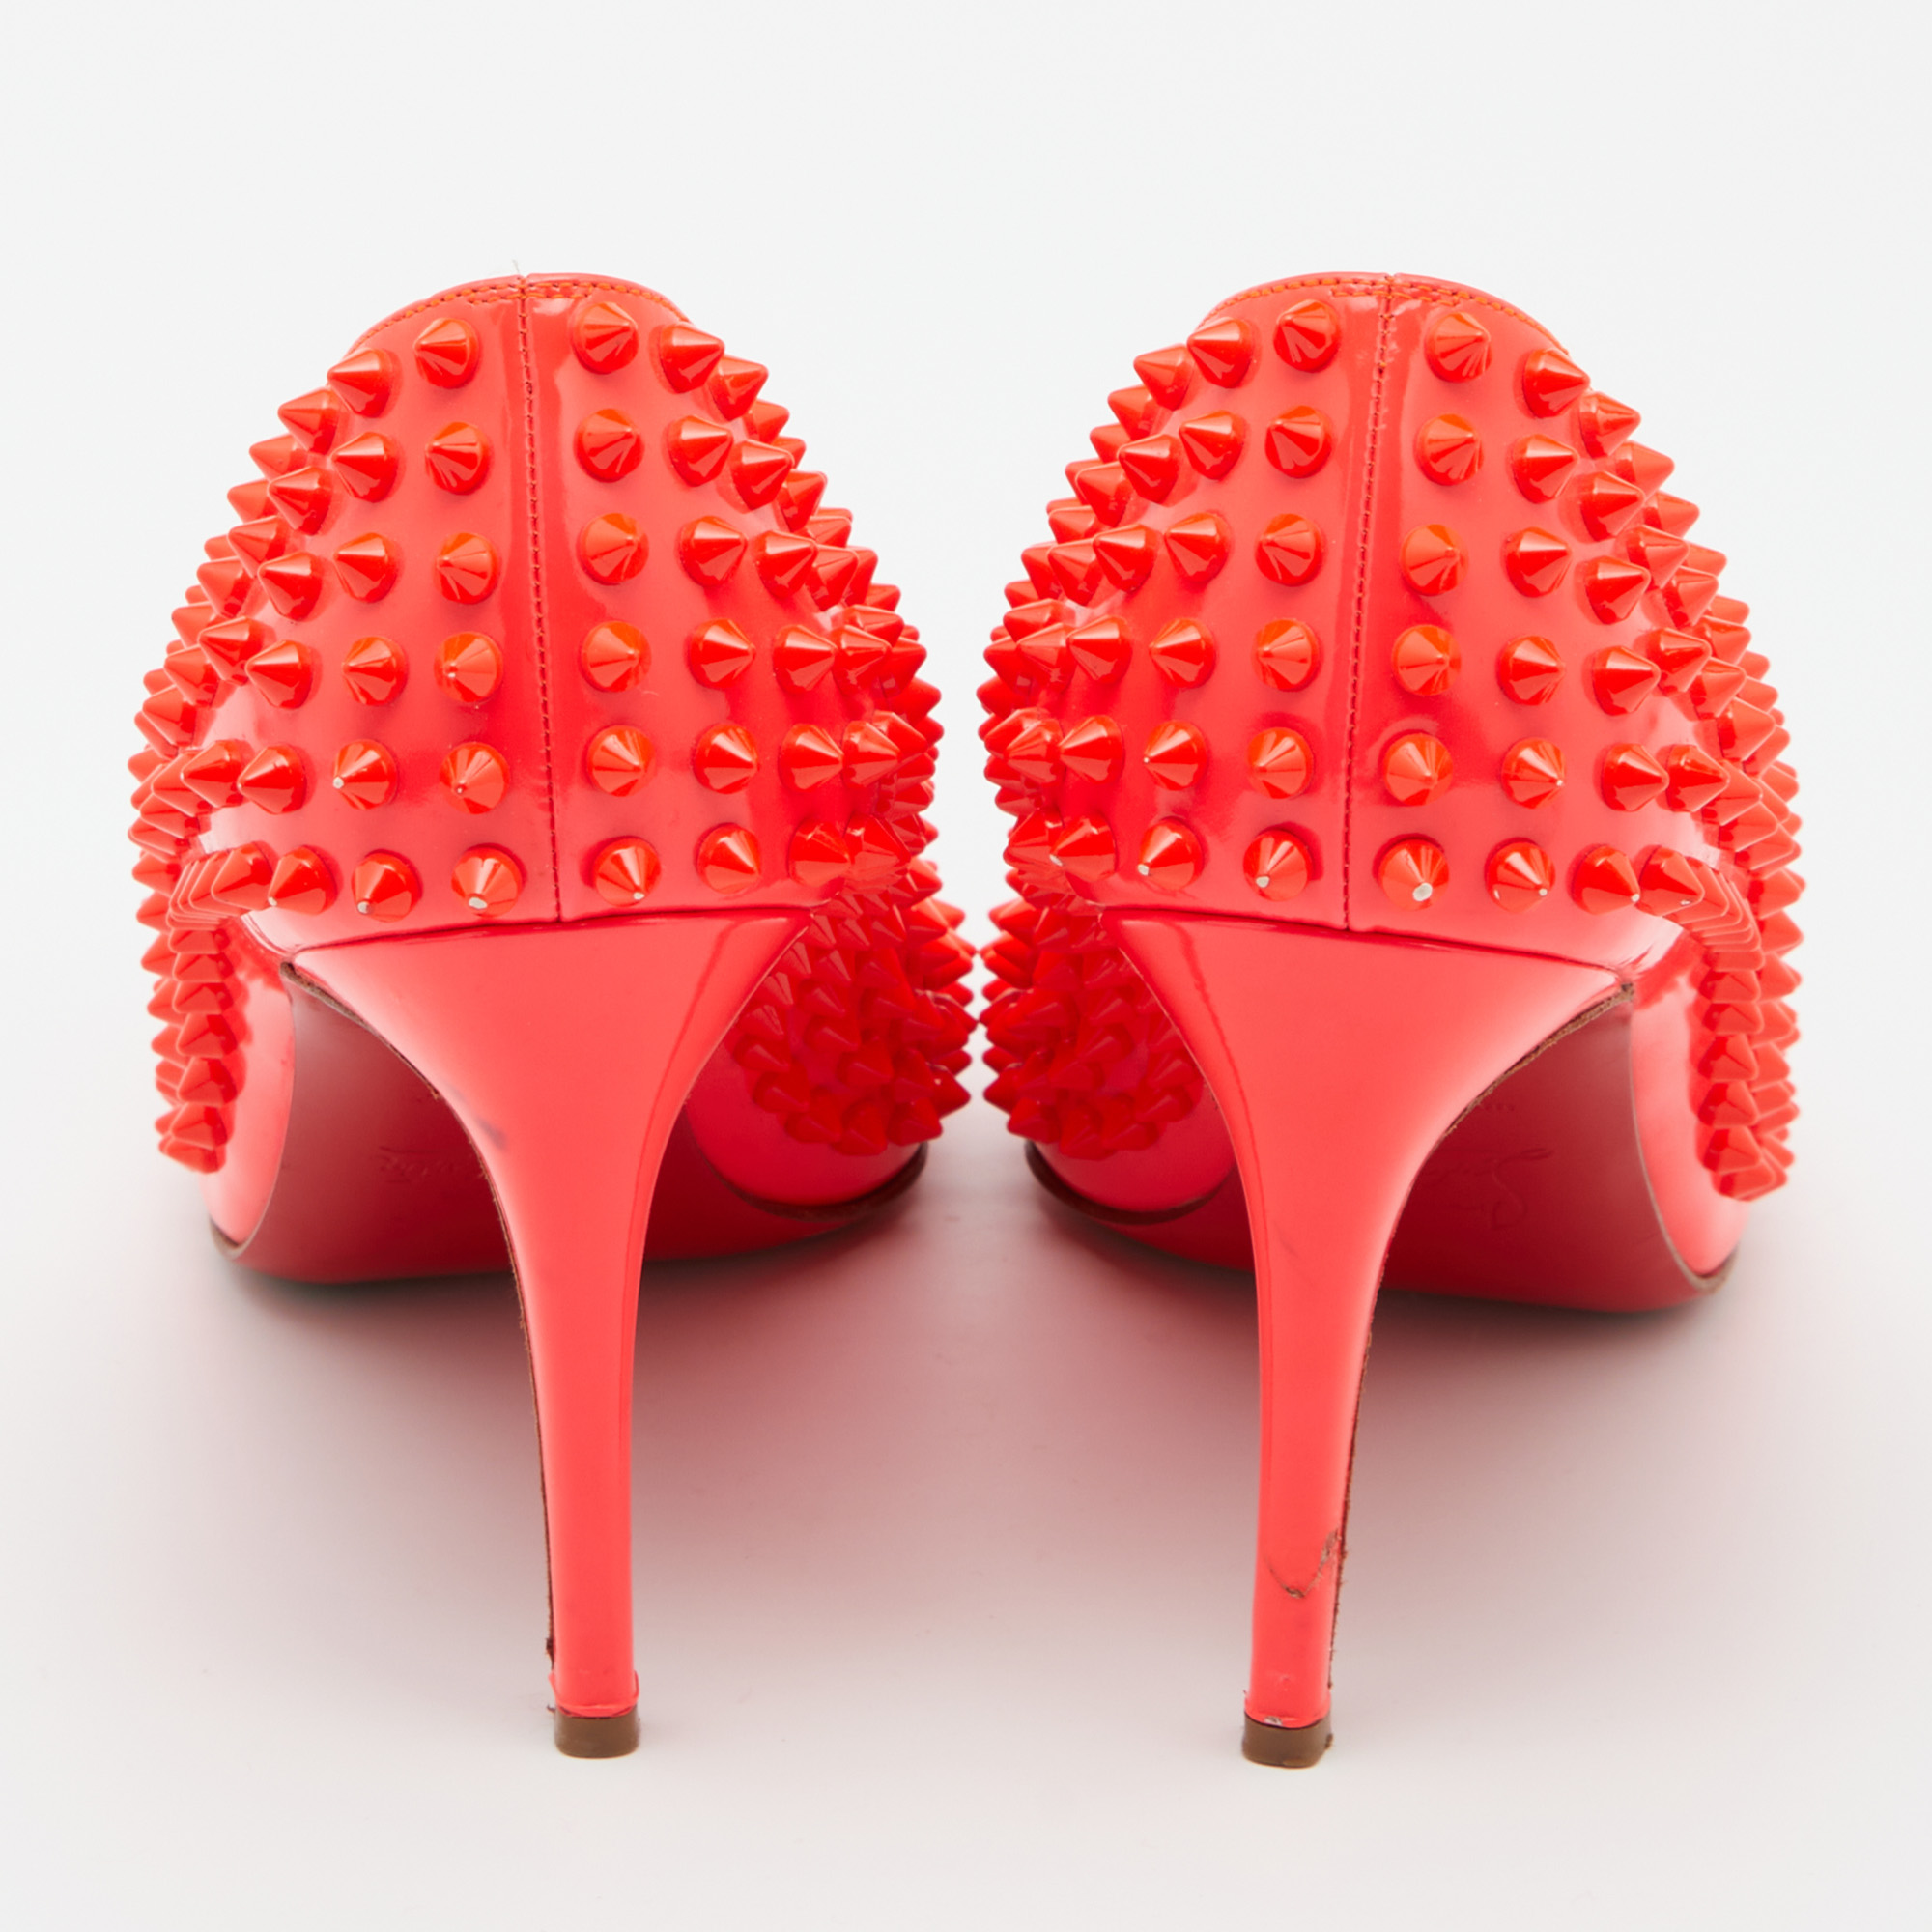 Christian Louboutin Orange Patent Leather Pigalle Spikes Pumps Size 40